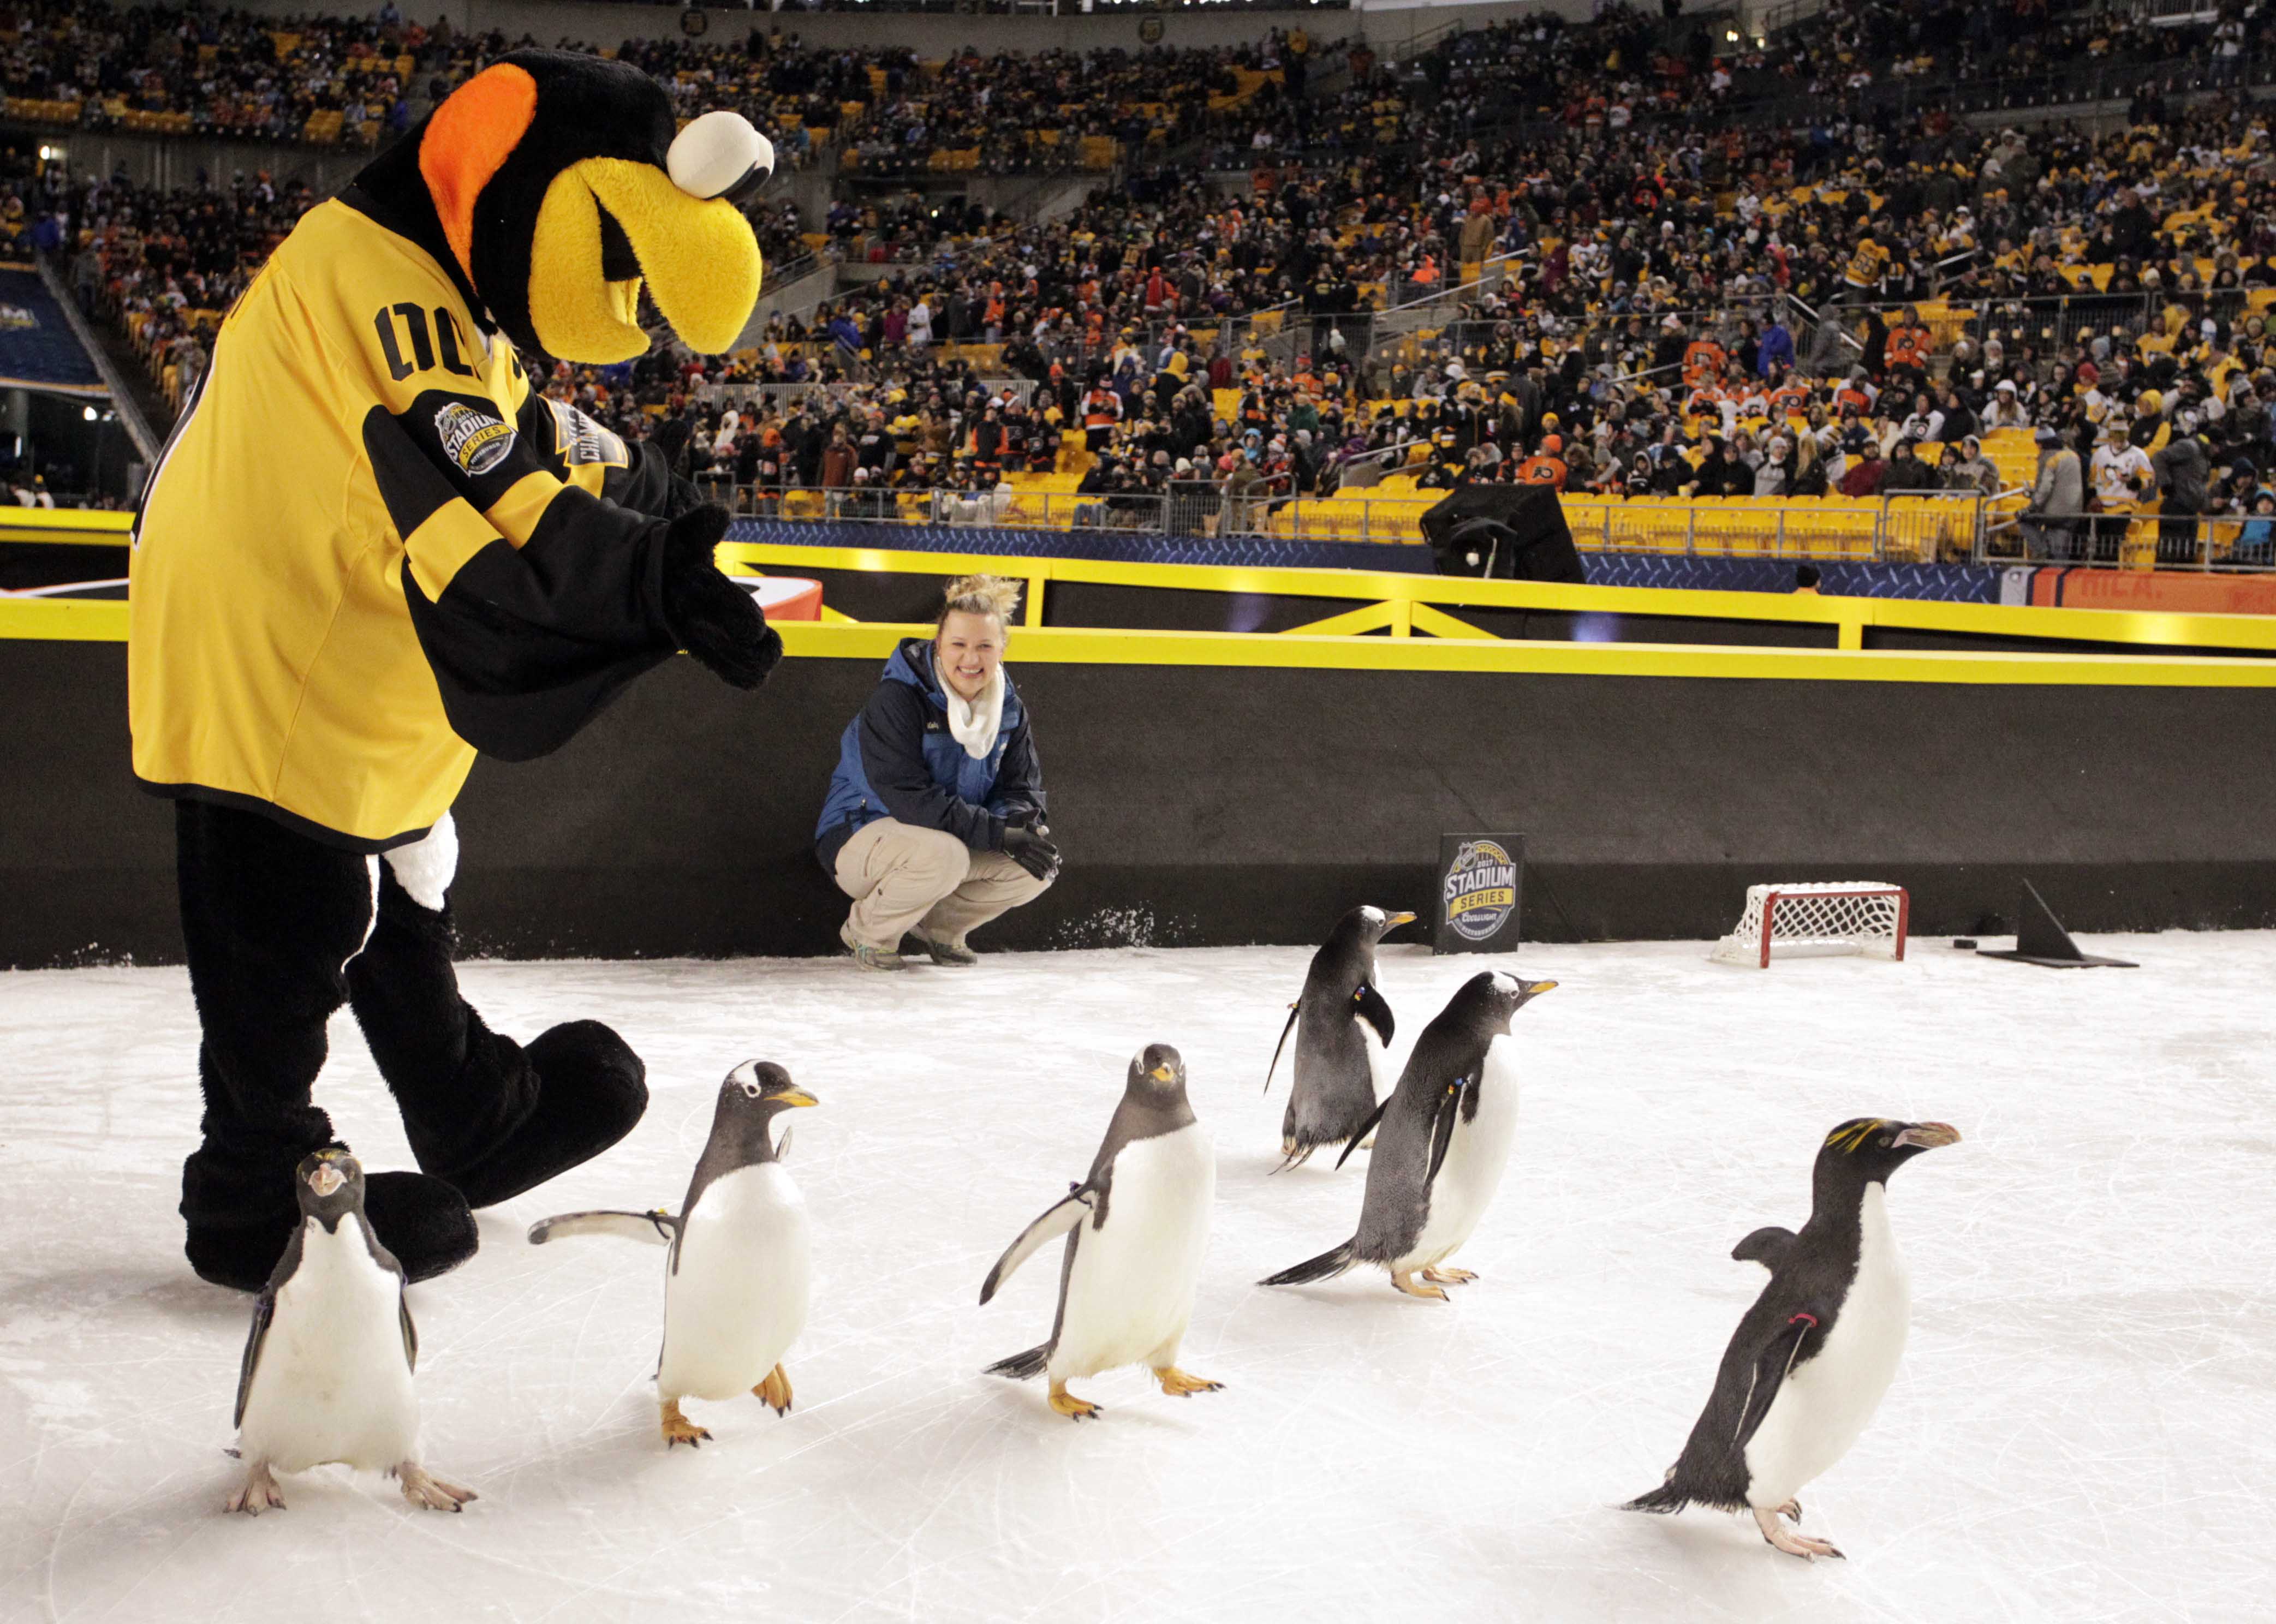 The Pittsburgh Penguins mascot plays with live penguins before the Pittsburgh Penguins host the Philadelphia Flyers in a Stadium Series hockey game at Heinz Field, on Feb 25, 2017. (Charles LeClaire—USA Today Sports/Reuters)